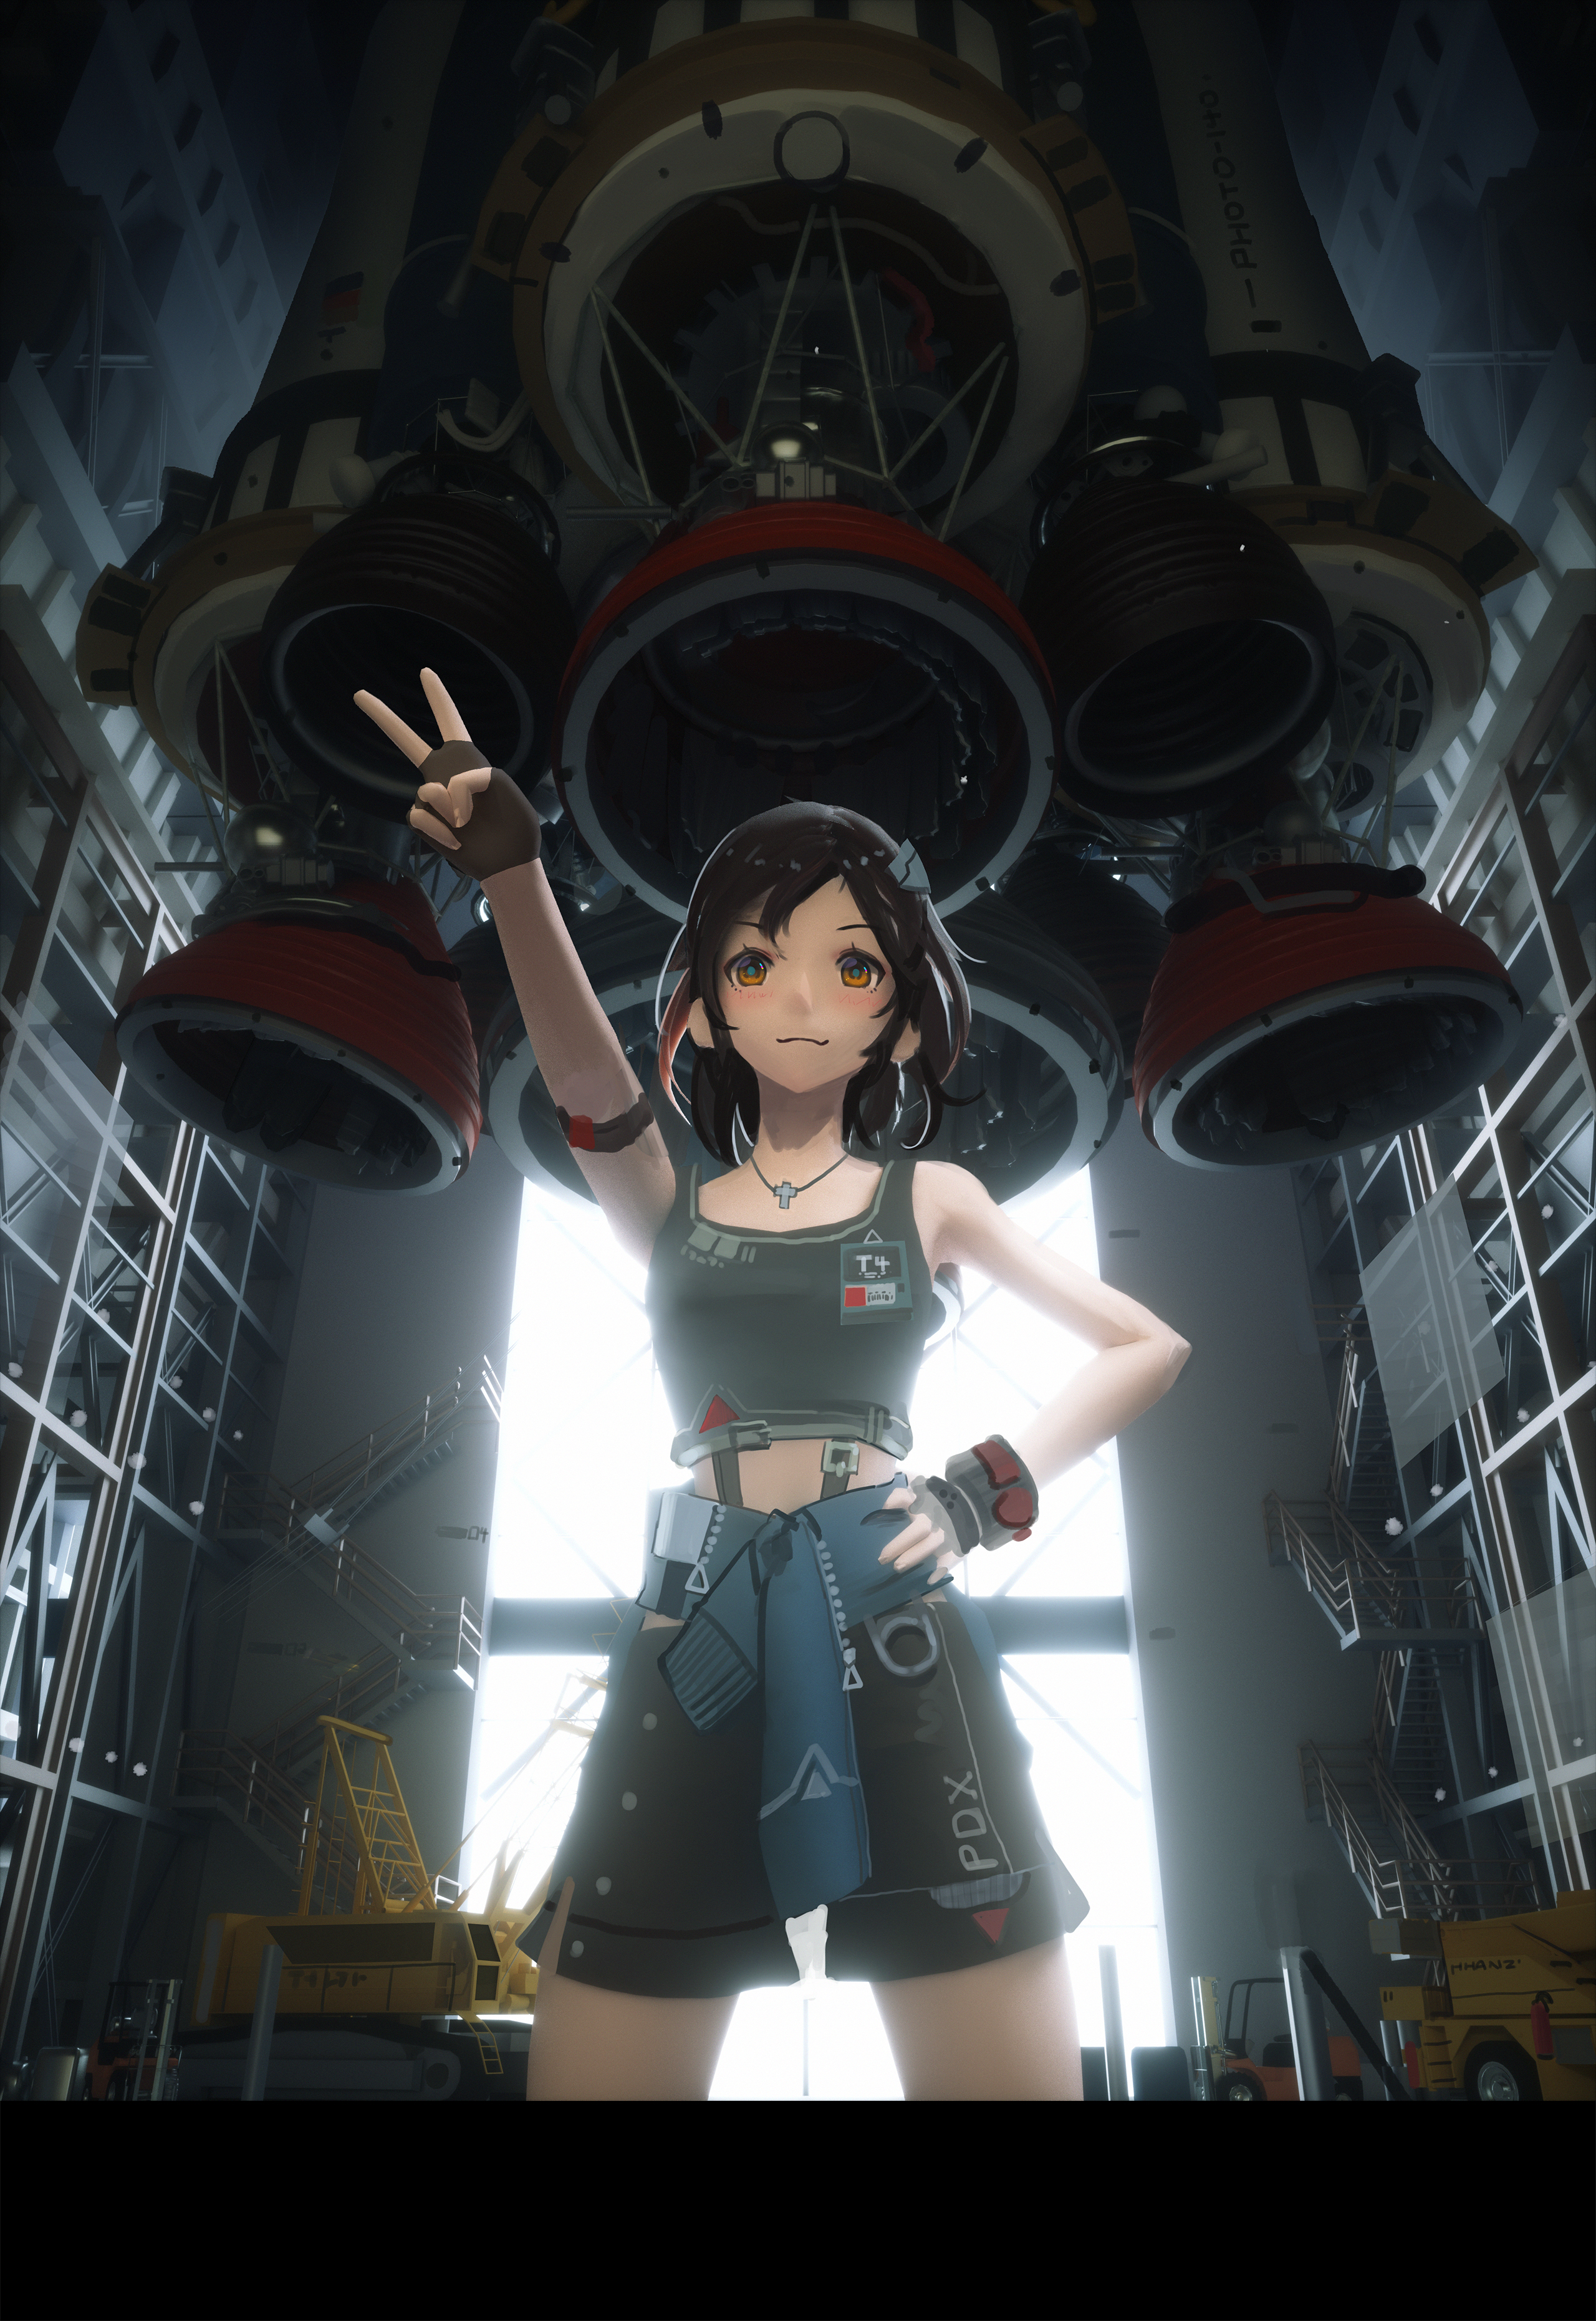 Anime 2560x3723 T5 anime girls science fiction rocket science fiction women anime hand gesture brunette standing hands on hips Pixiv